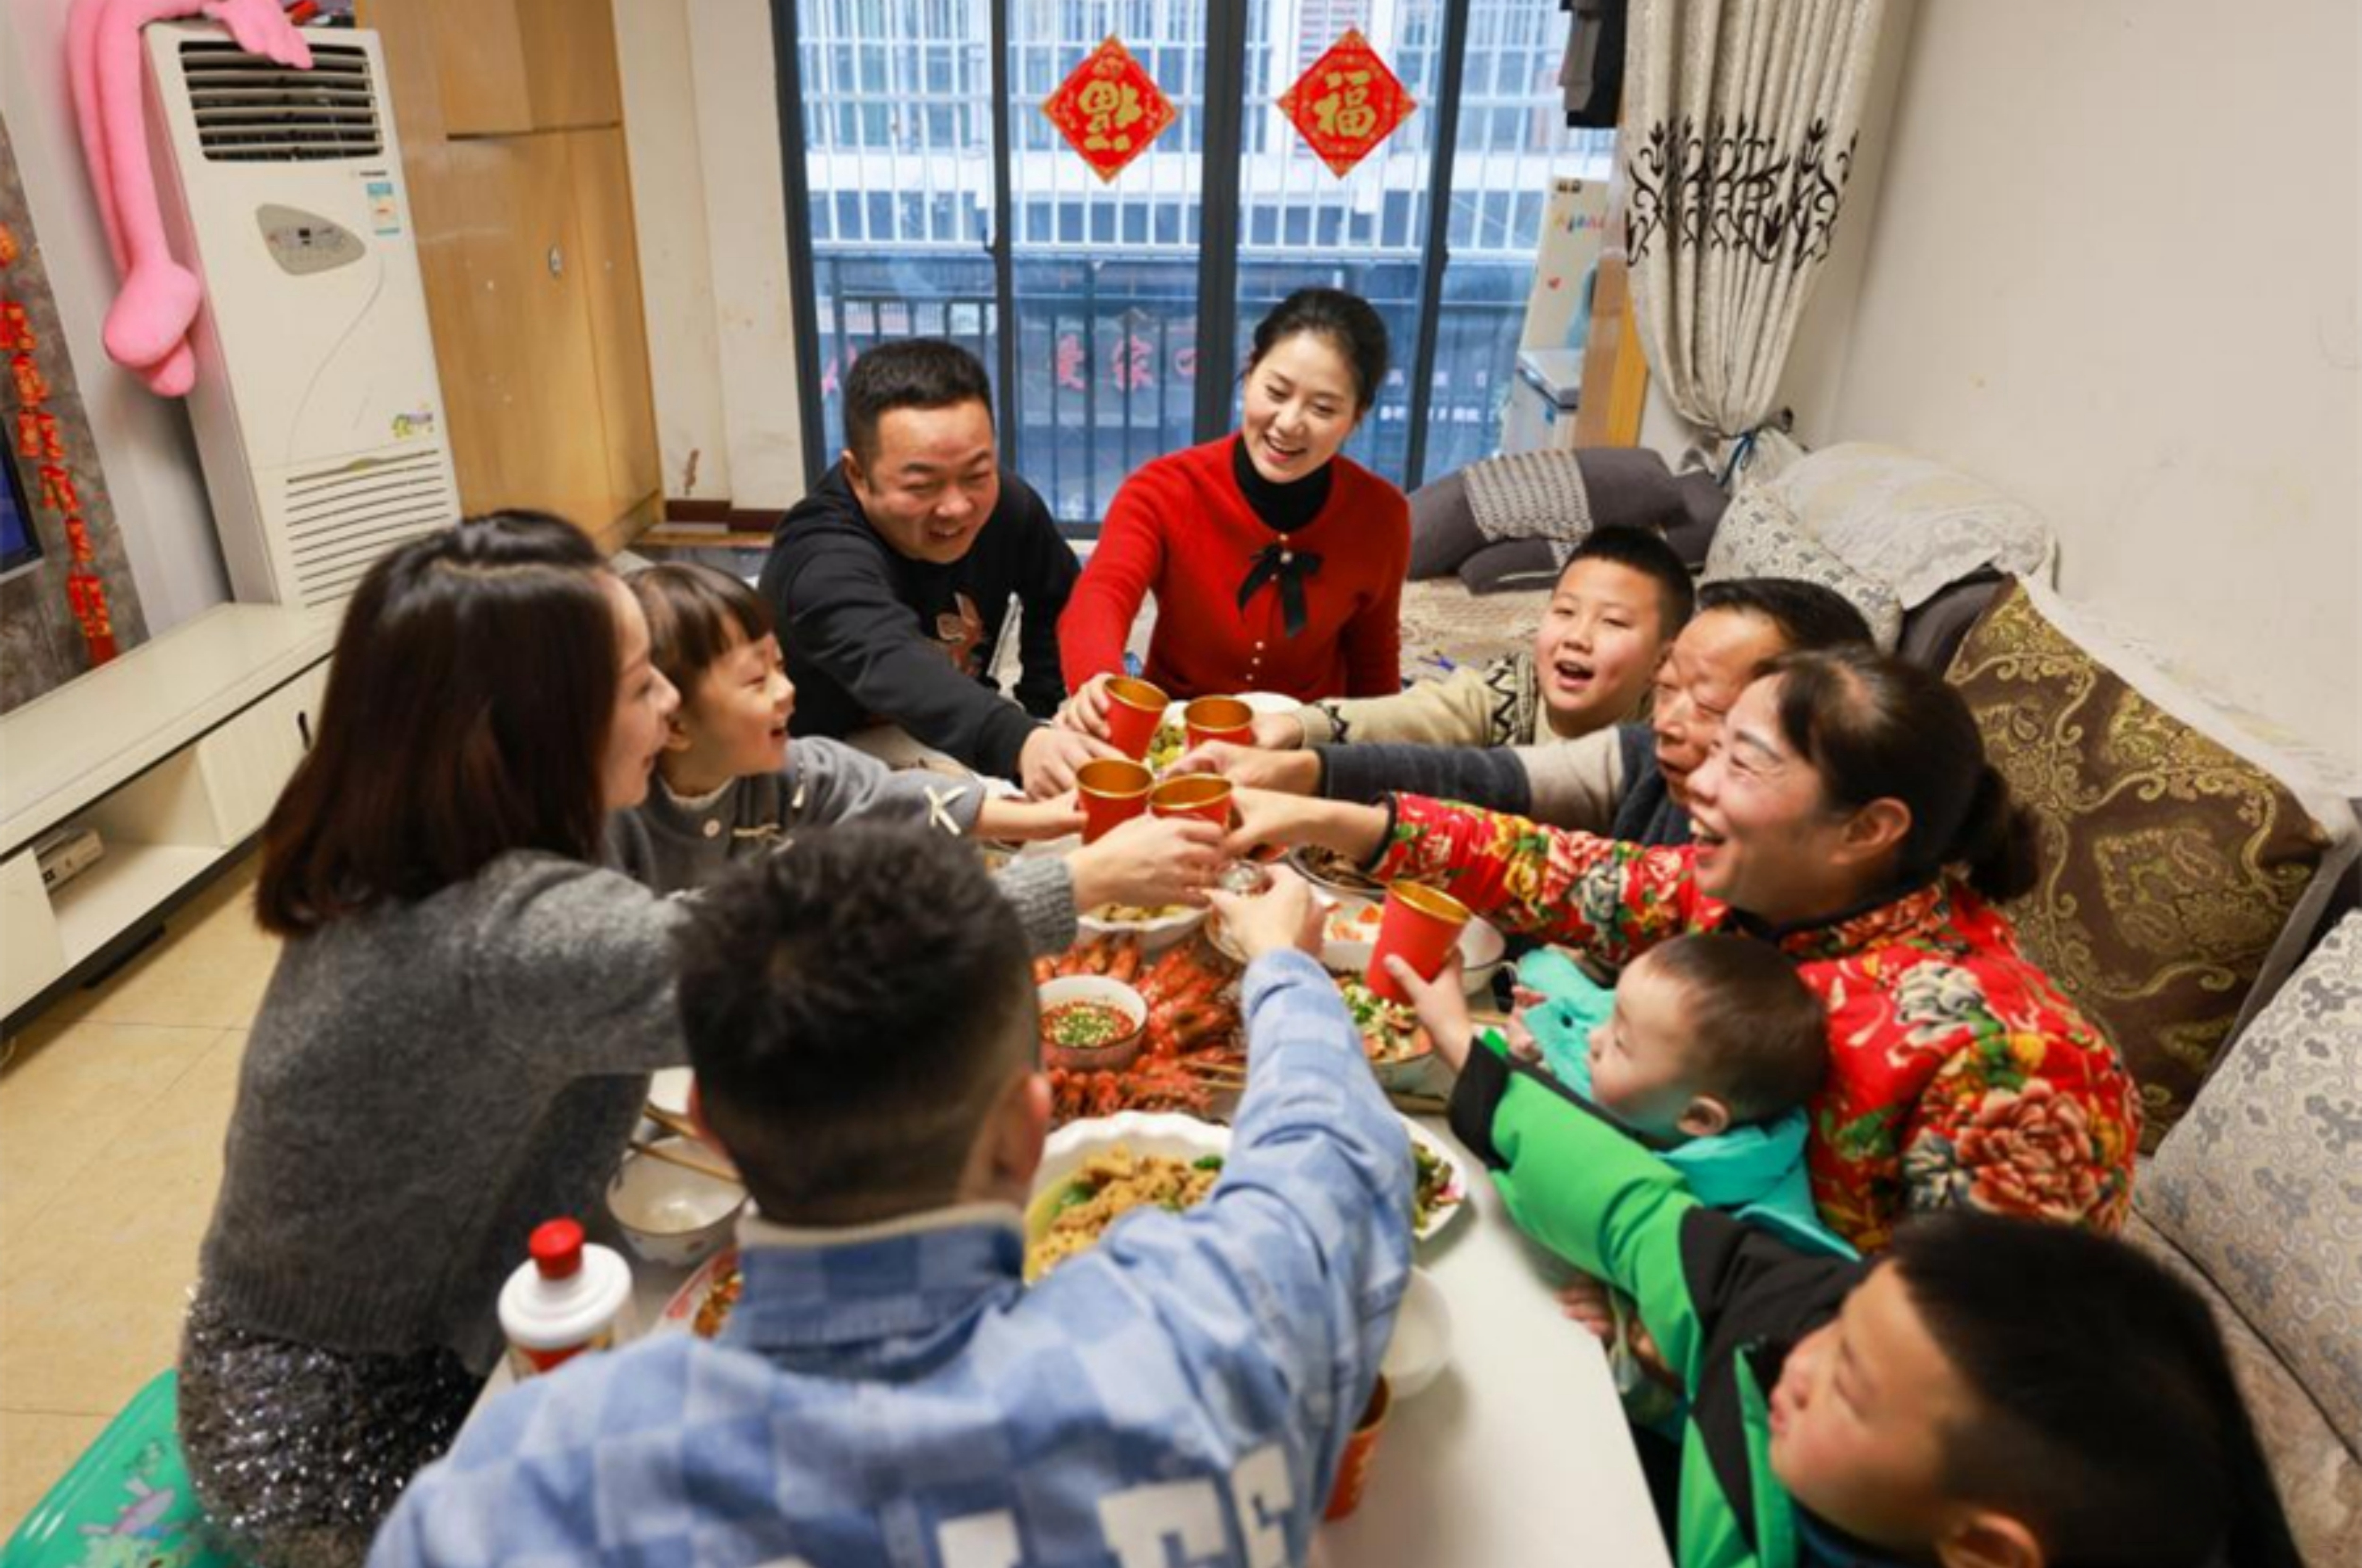 People across China have family reunion dinners on Chinese Lunar New Year's eve